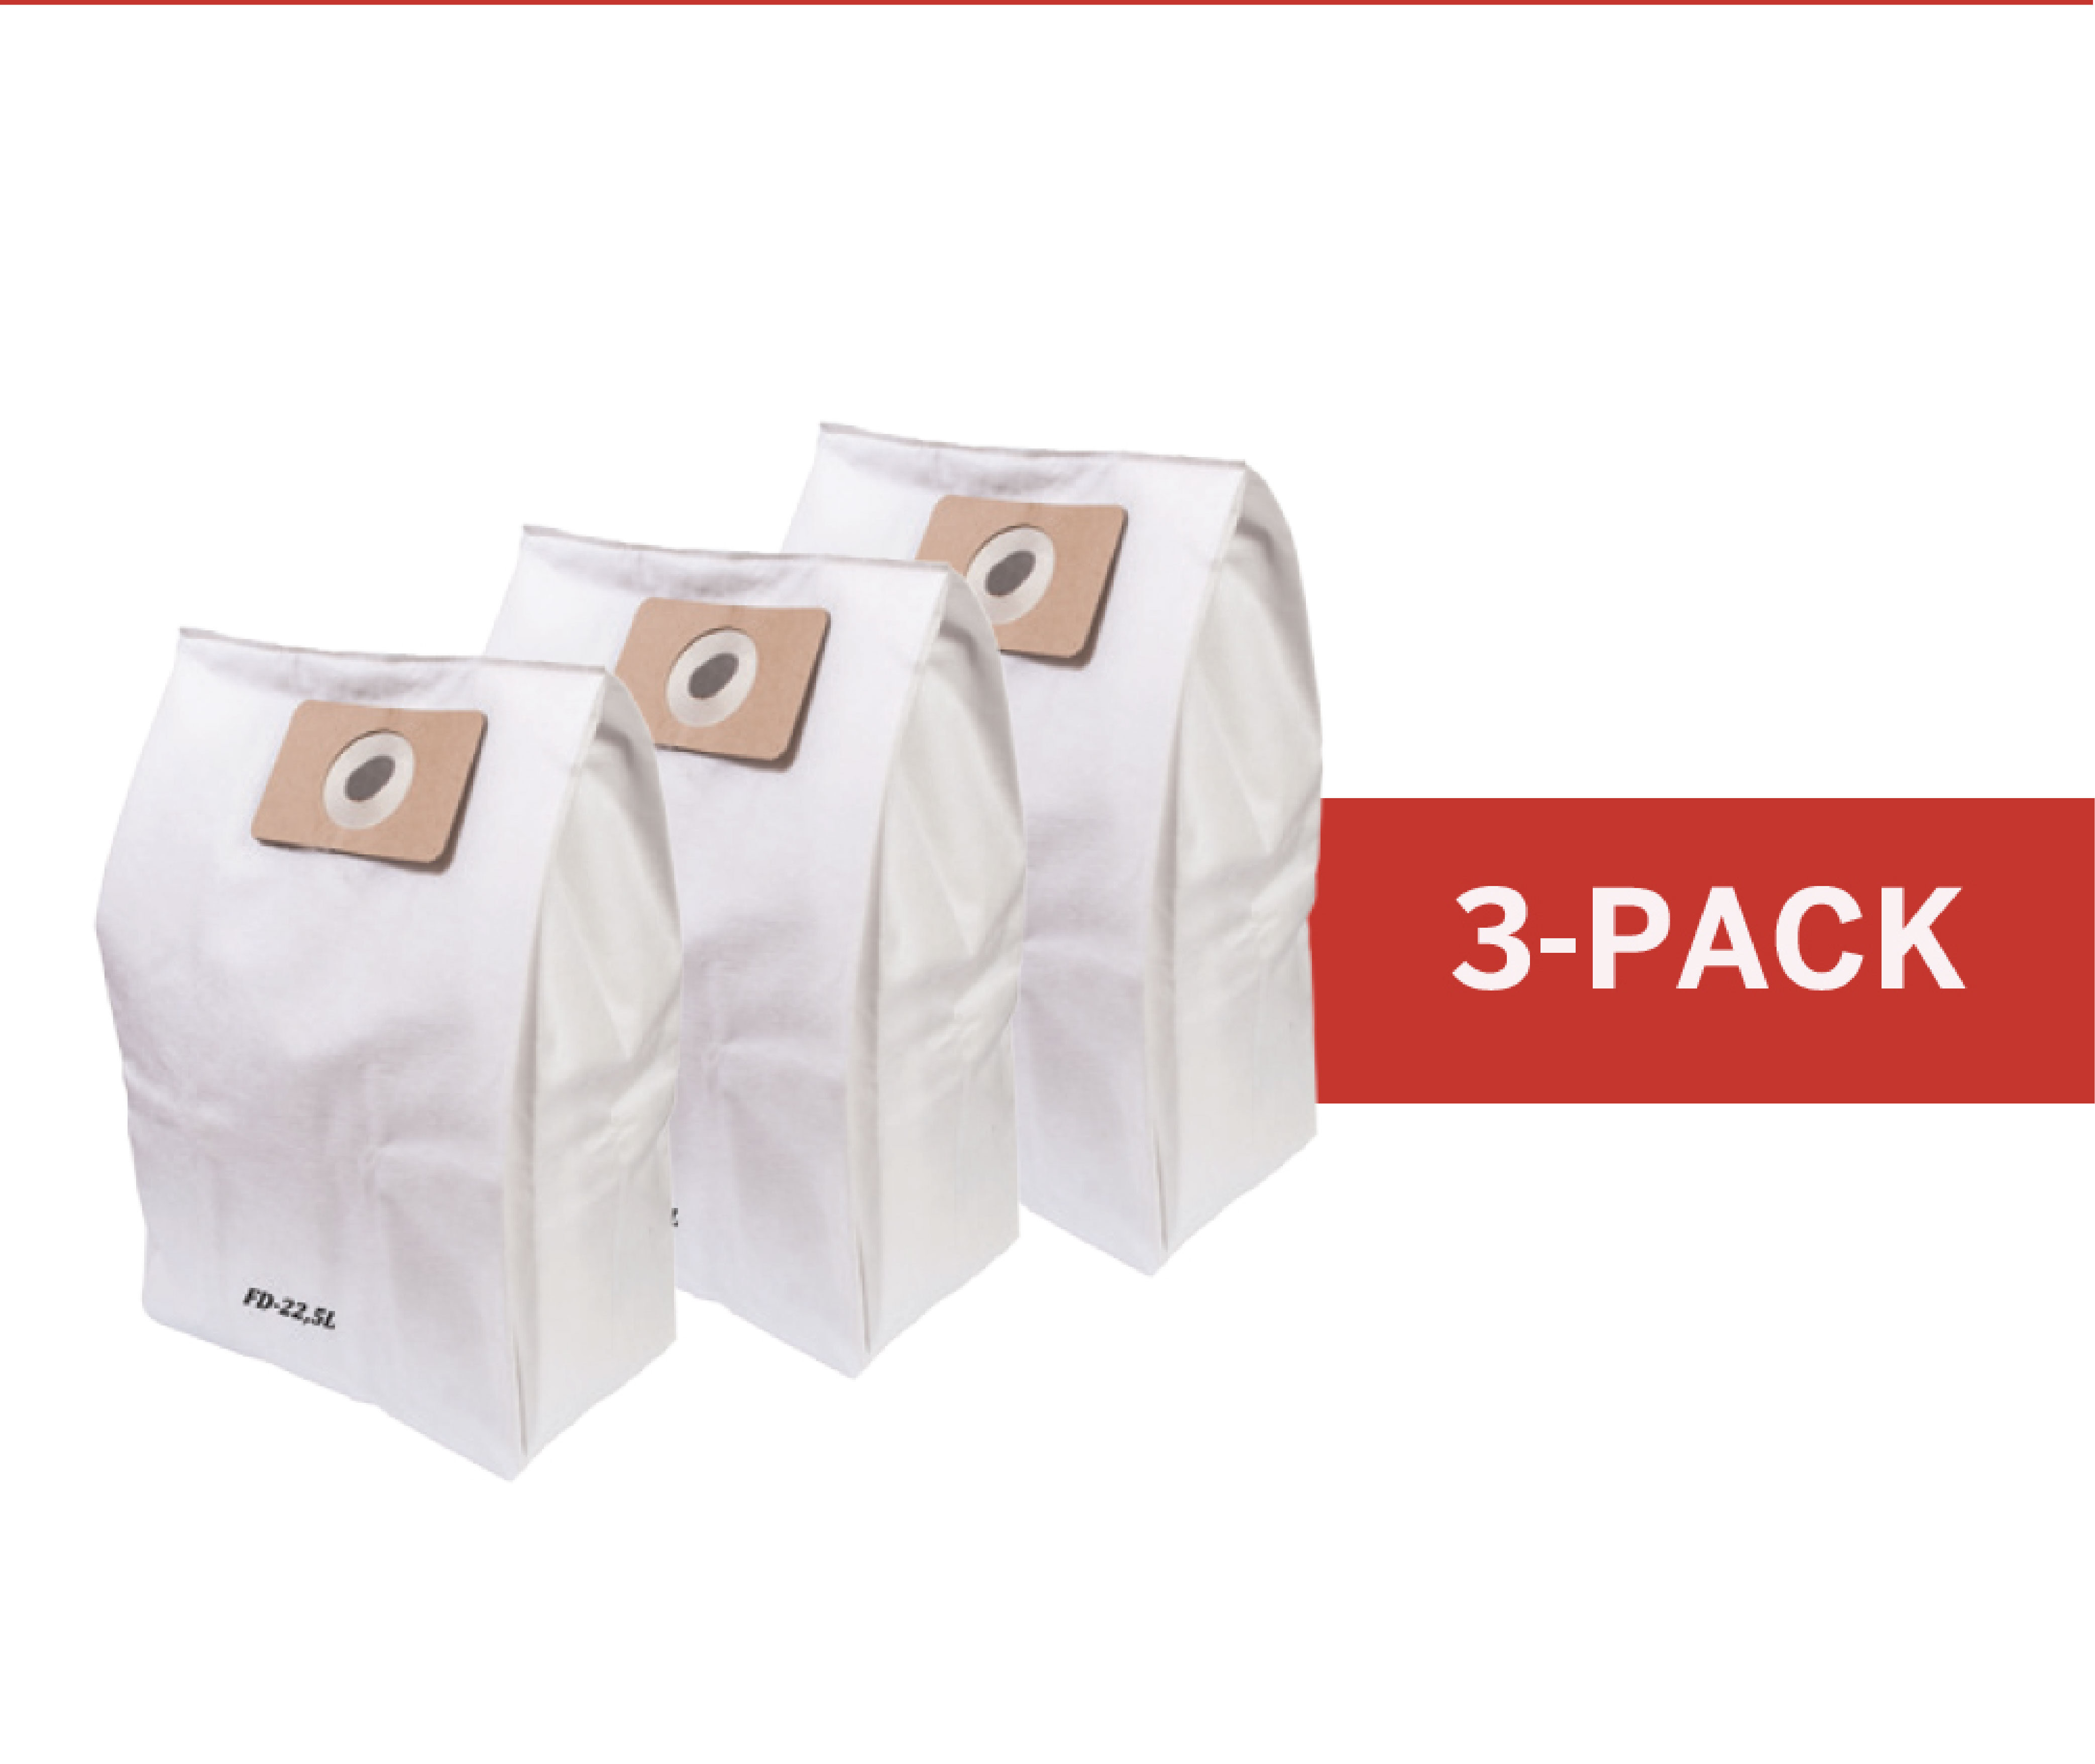 Triple layer disposable bags - 3 pack